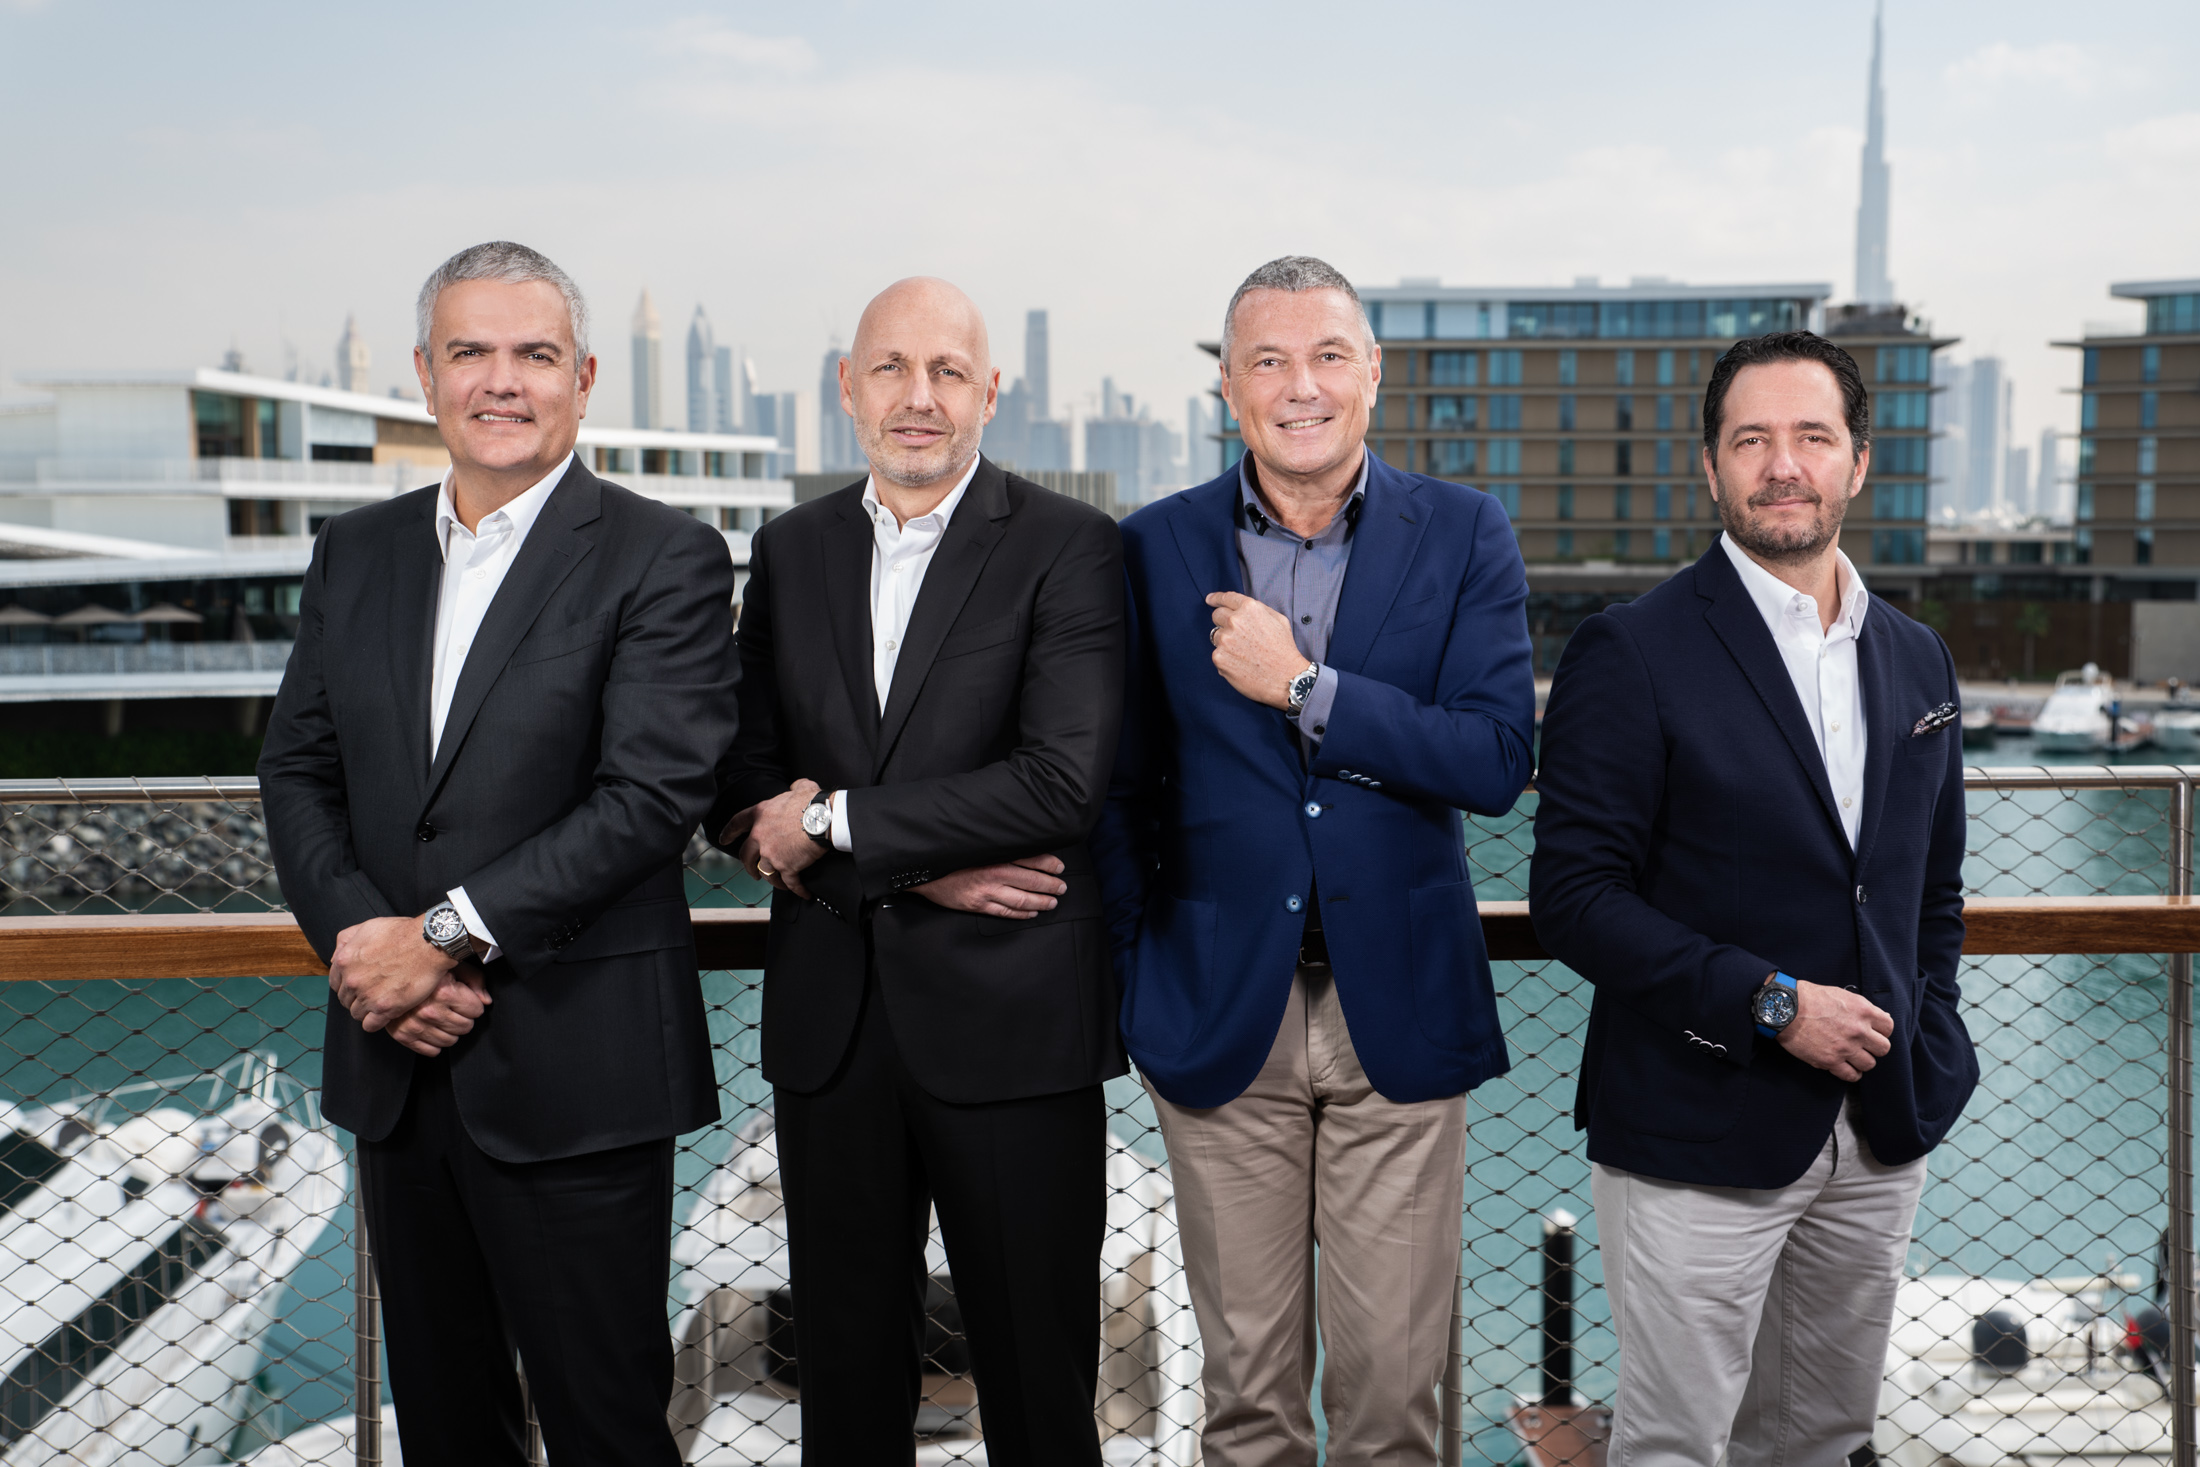 icardo Guadalupe (CEO Hublot), Stephane Bianchi (CEO Watchmaking Division, LVMH), Jean-Christophe Babin (CEO, Bvlgari Group) Julien Tornare (CEO Zenith)